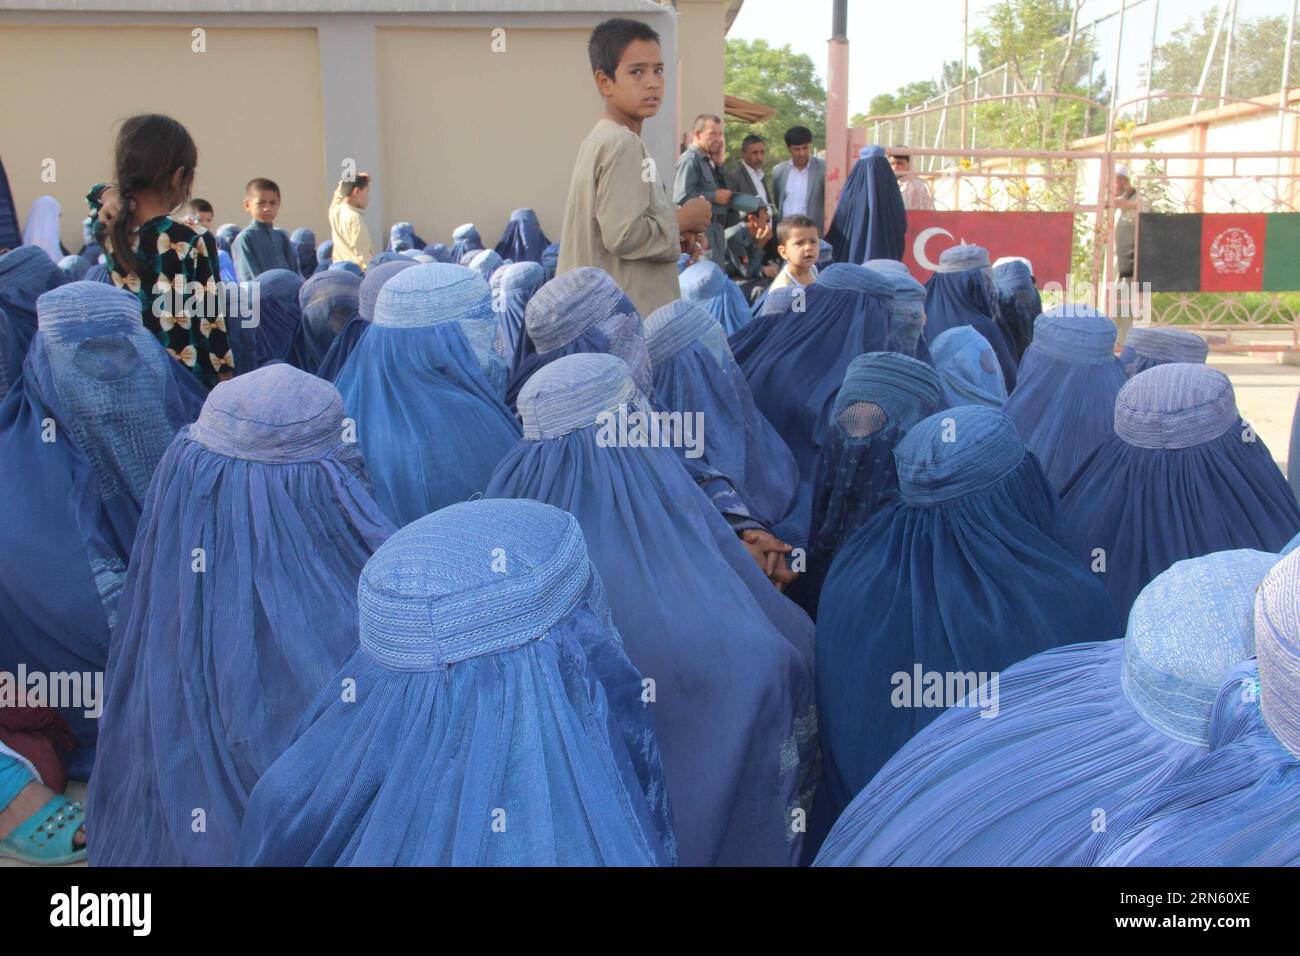 (150707) -- JAWZJAN, July 7, 2015 -- Afghan women wait to receive food donated by Turkish government during the holy month of Ramadan in Jawzjan province, northern Afghanistan, July 7, 2015. ) AFGHANISTAN-JAWZJAN-RAMADAN-FOOD Arui PUBLICATIONxNOTxINxCHN   150707 Jawzjan July 7 2015 Afghan Women Wait to receive Food Donated by Turkish Government during The Holy Month of Ramadan in Jawzjan Province Northern Afghanistan July 7 2015 Afghanistan Jawzjan Ramadan Food Arui PUBLICATIONxNOTxINxCHN Stock Photo